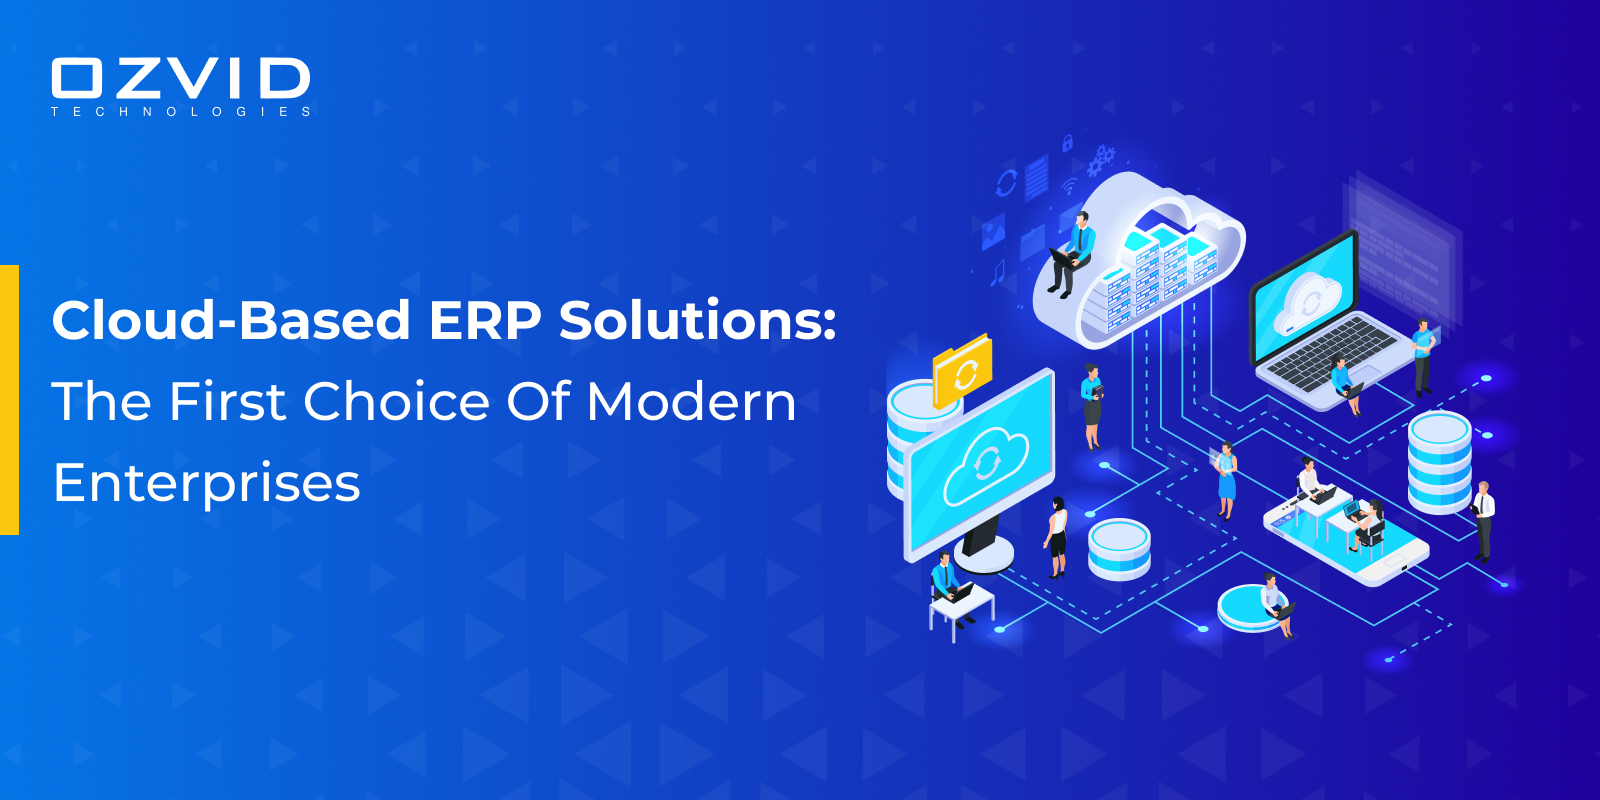 Cloud-based ERP Solutions: The First Choice Of Modern Enterprises